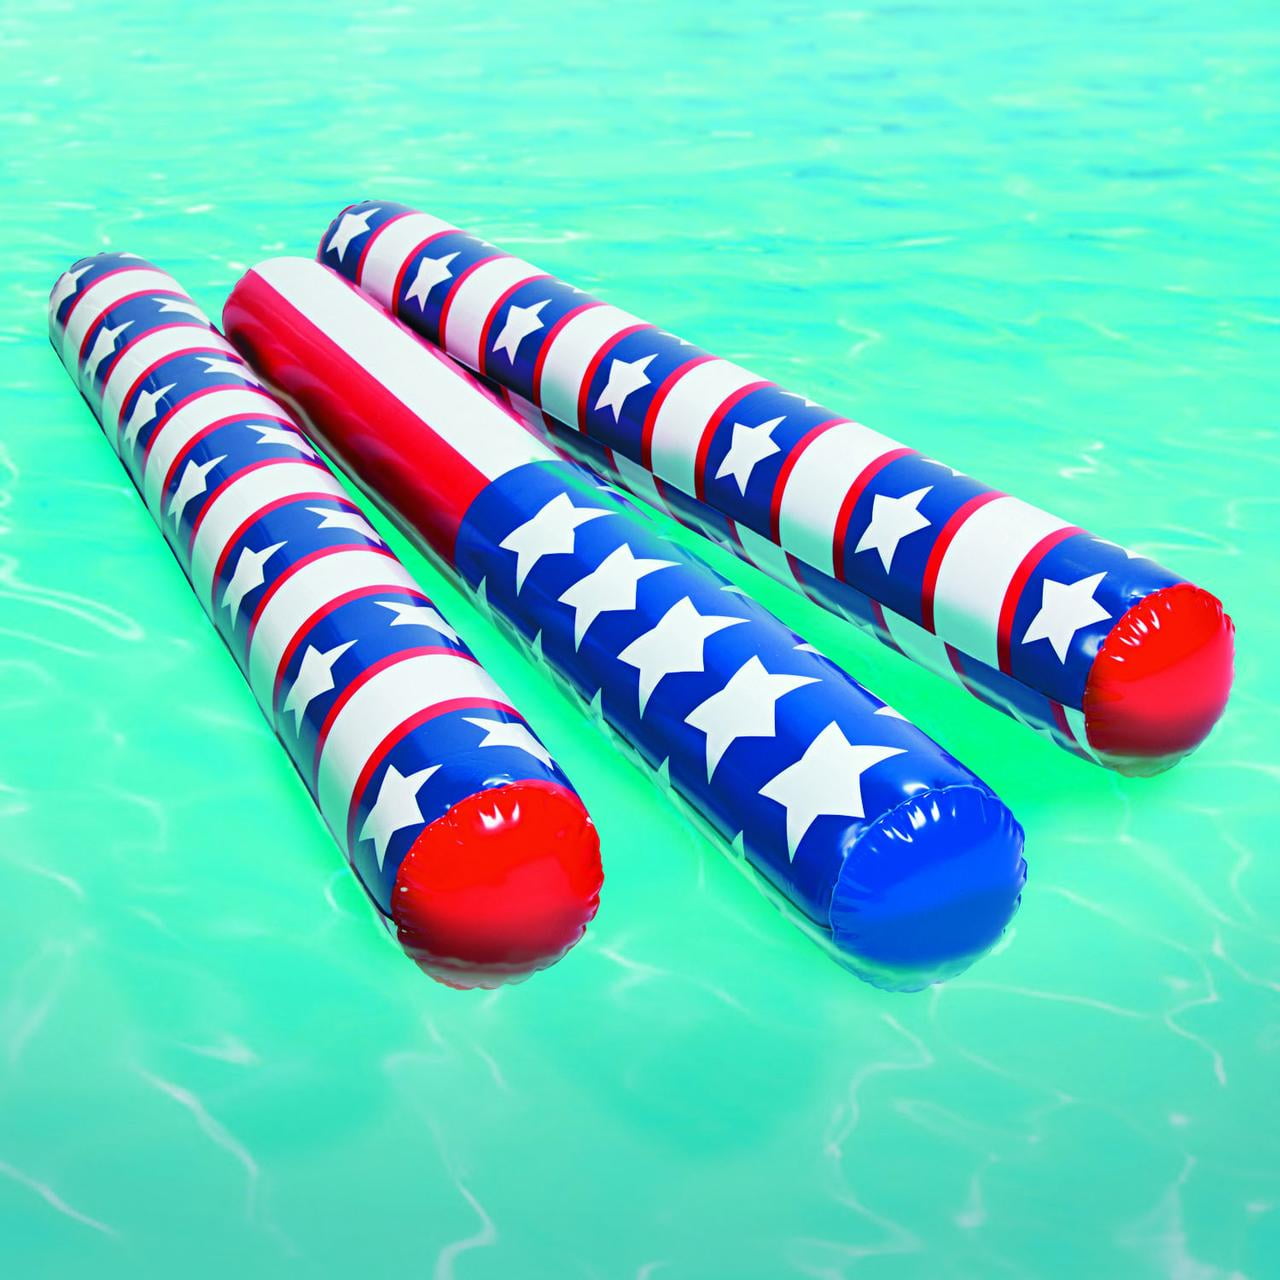 1PC Blow Up Inflatable Striped Fish Swimming Pool Beach Party Kids Toy Gift Prop 